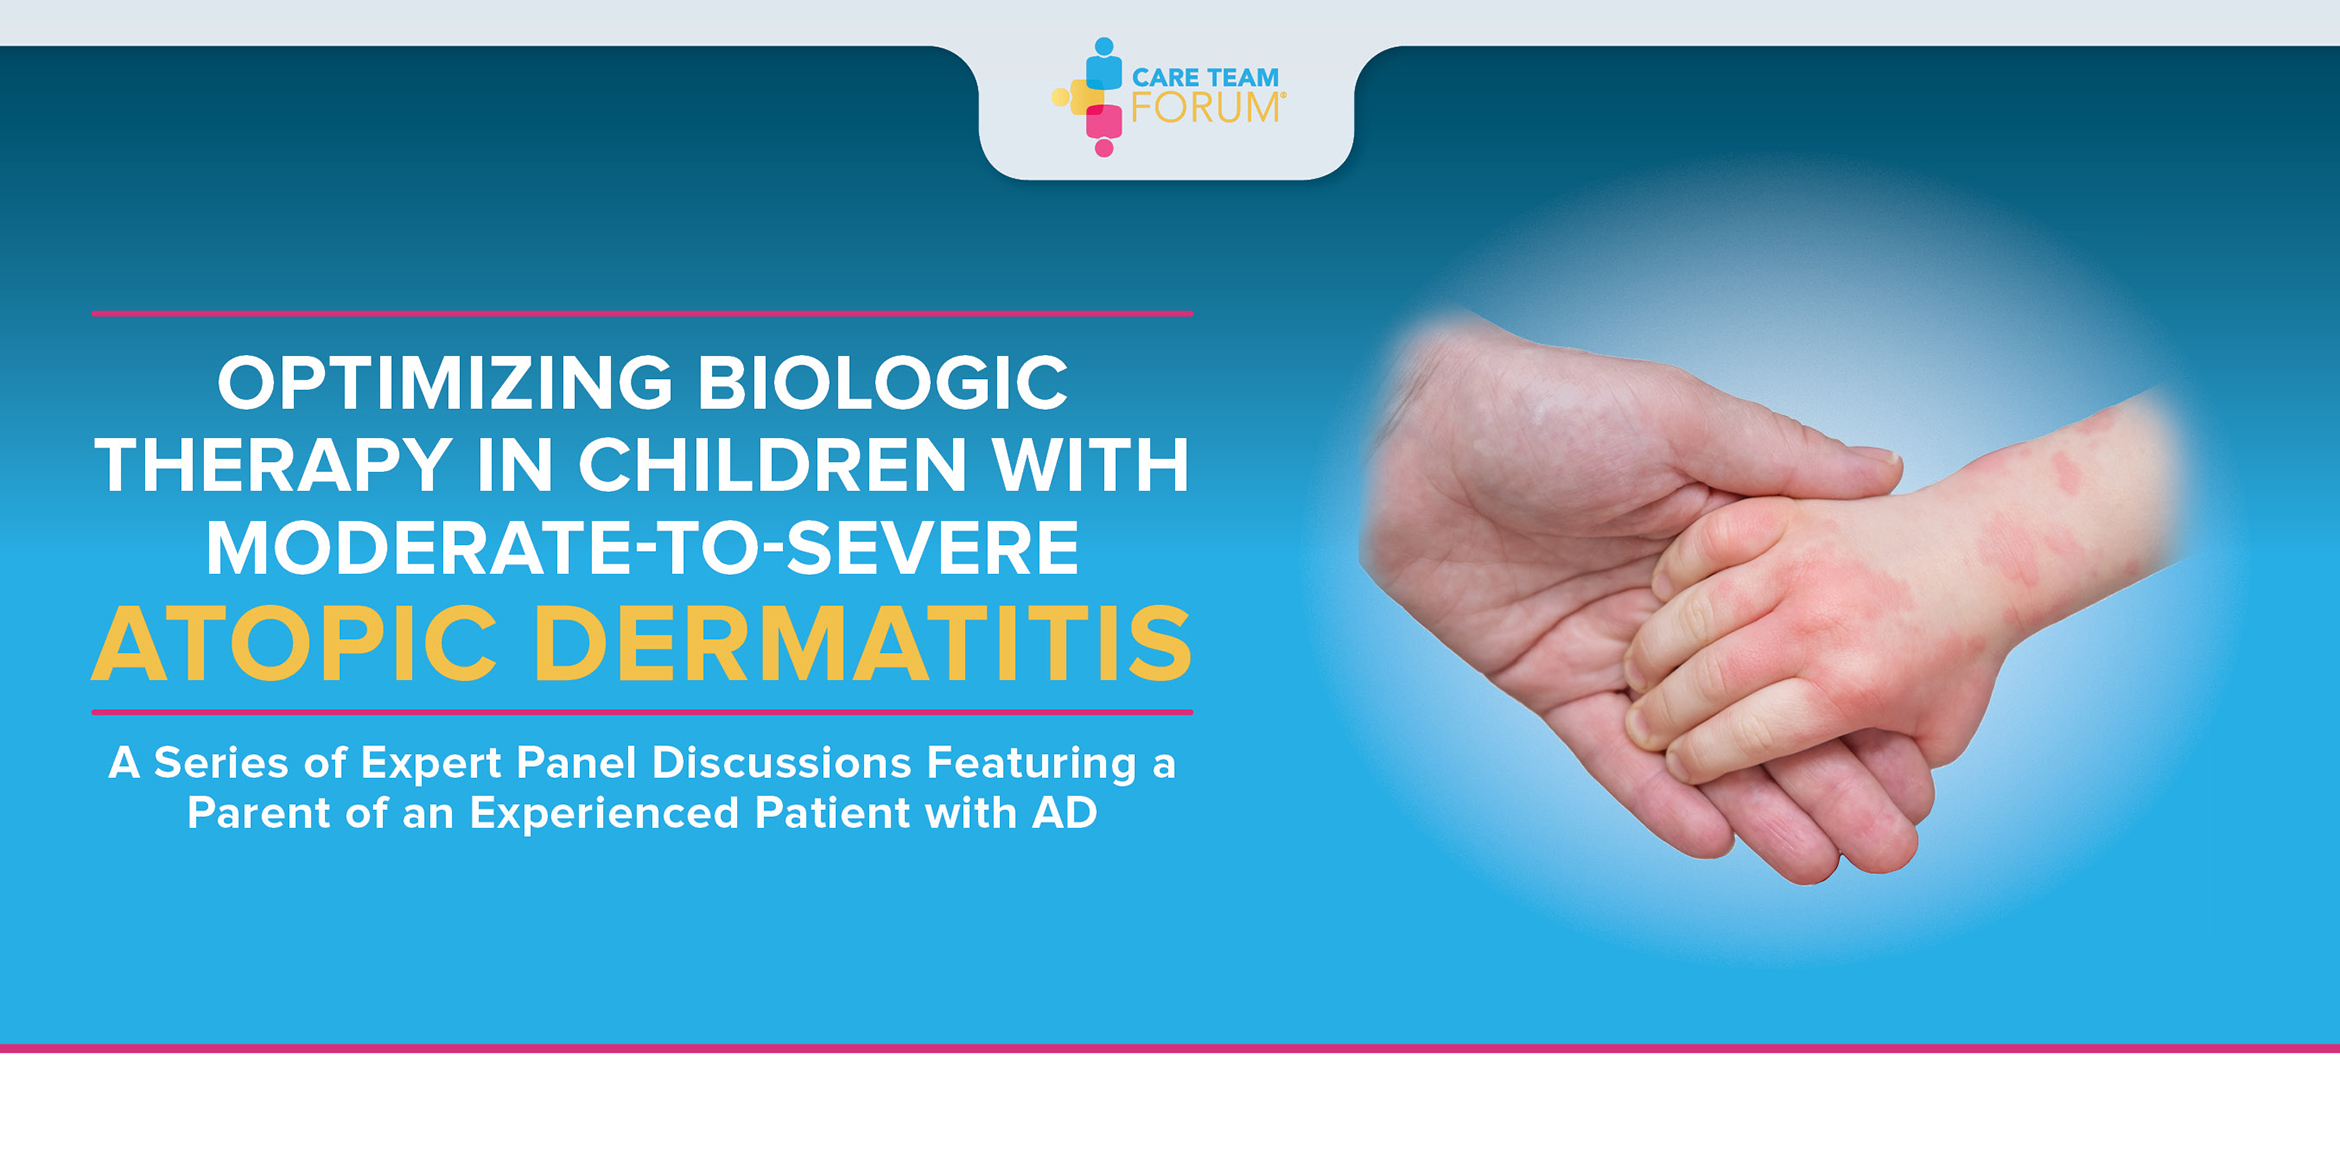 Optimizing Biologic Therapy in Children with Moderate-to-Severe Atopic Dermatitis: A Series of Expert Panel Discussions Featuring a Parent of an Experienced Patient with AD